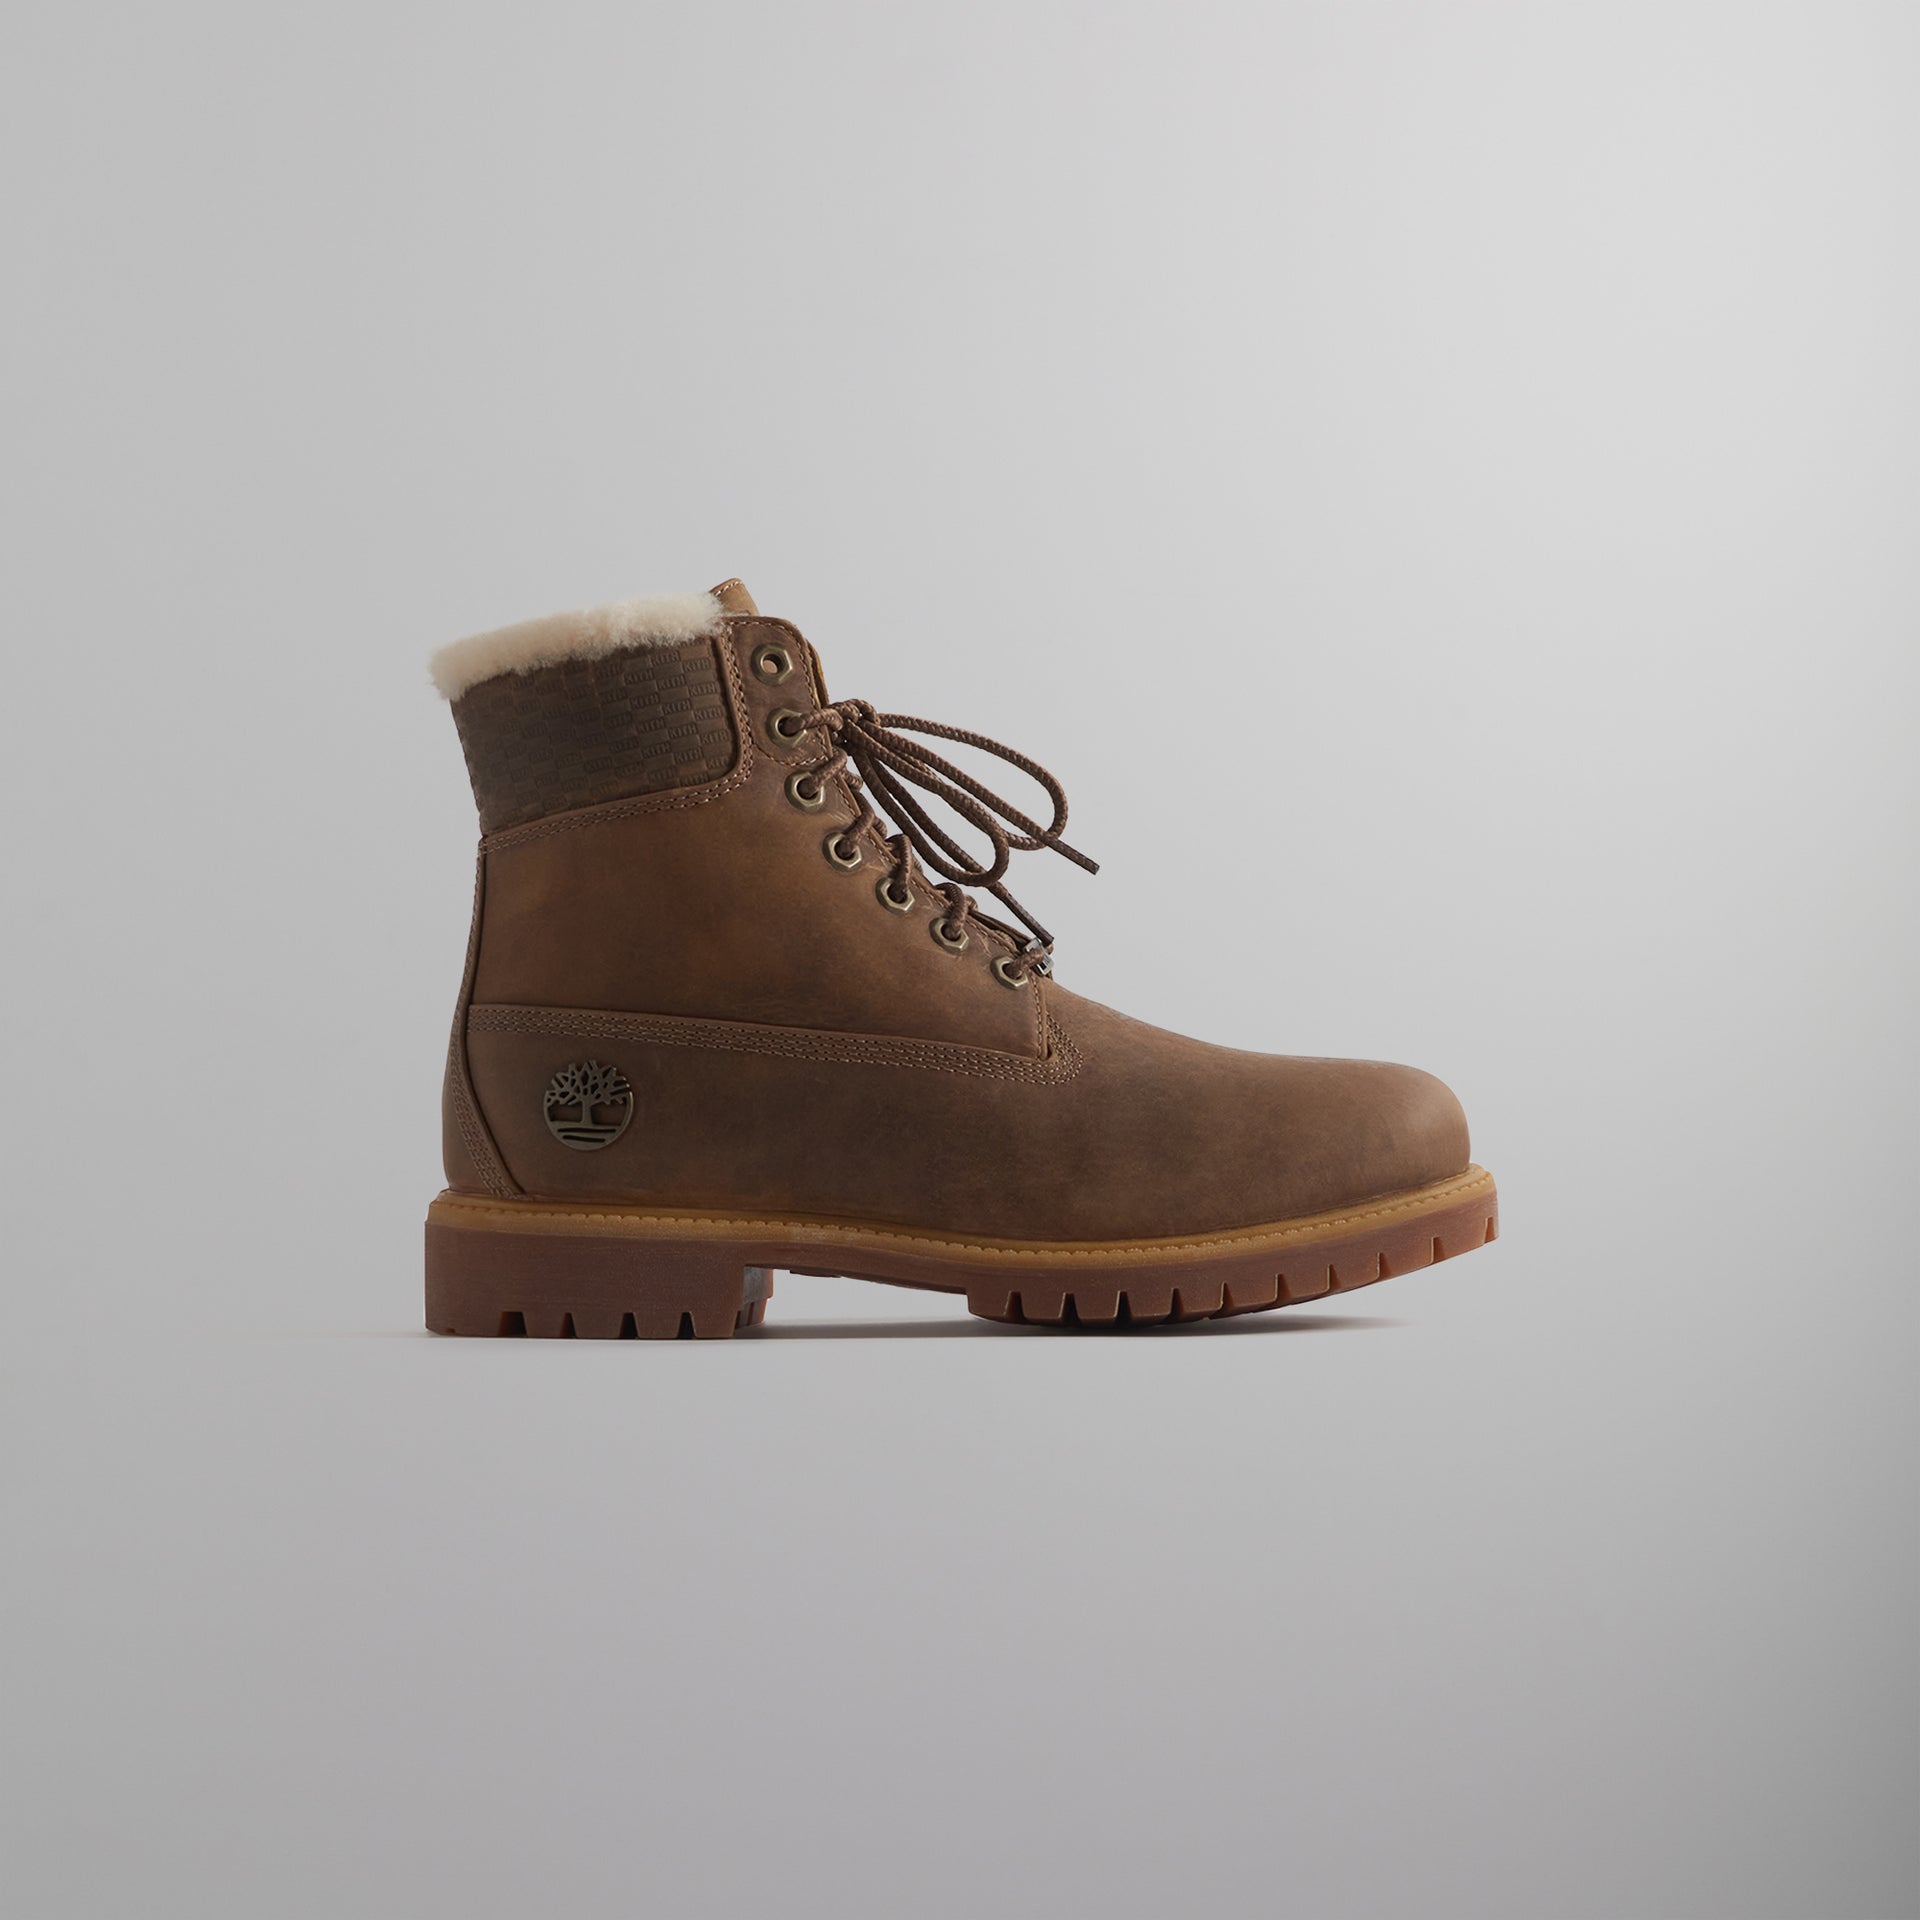 Ronnie Fieg for Timberland 6" Premium Shearling Lined Boot - Wheat